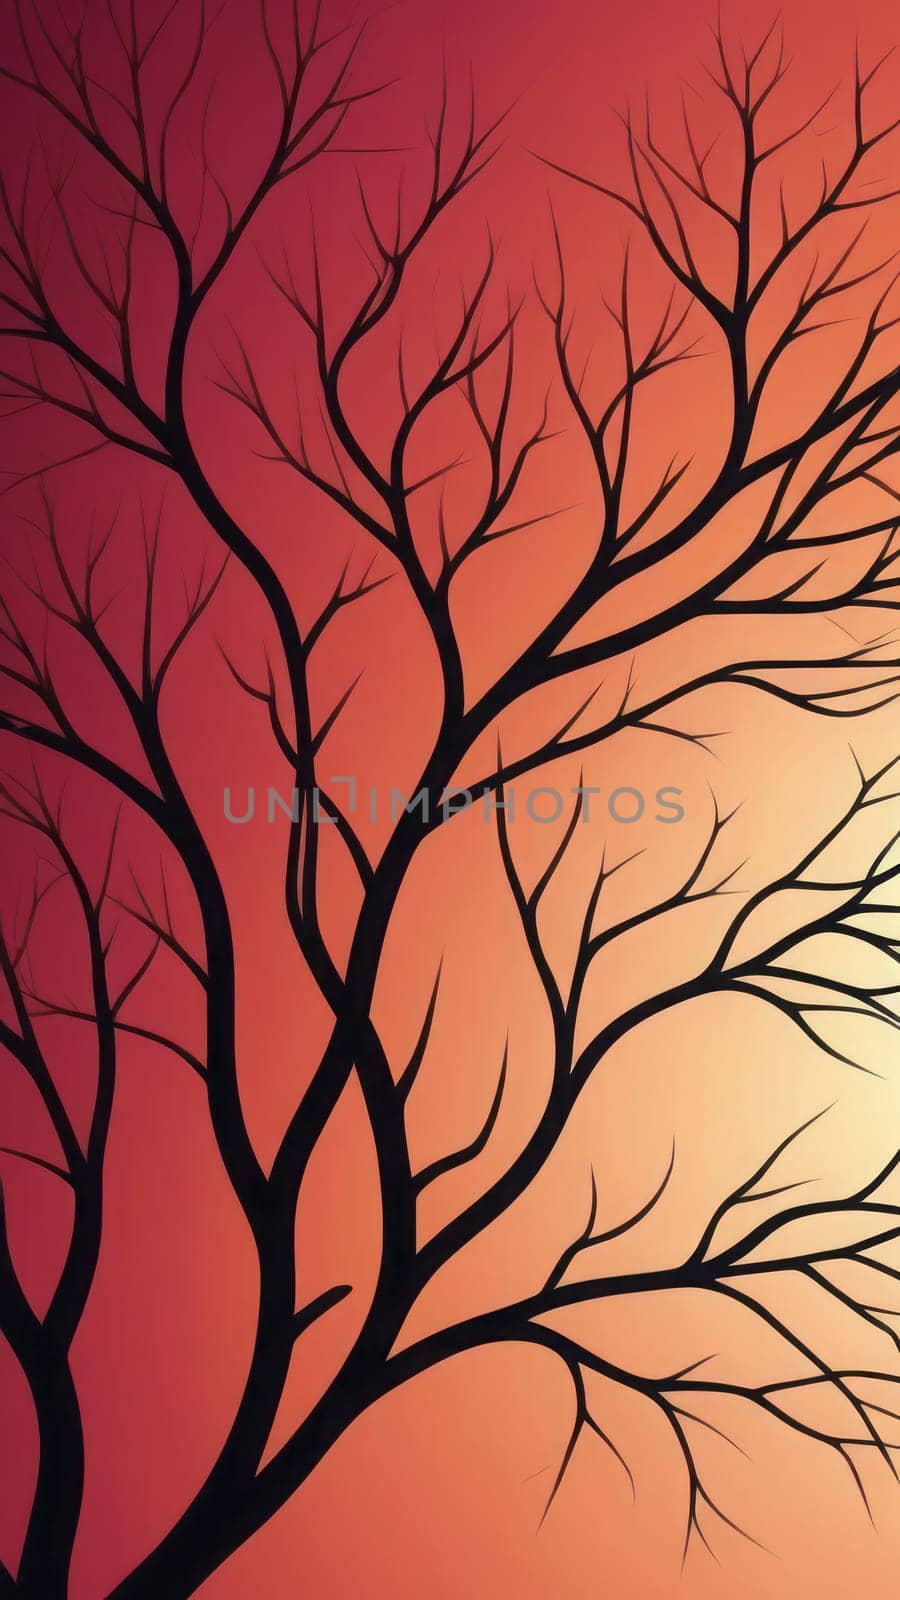 Screen background from Branched shapes and maroon by nkotlyar